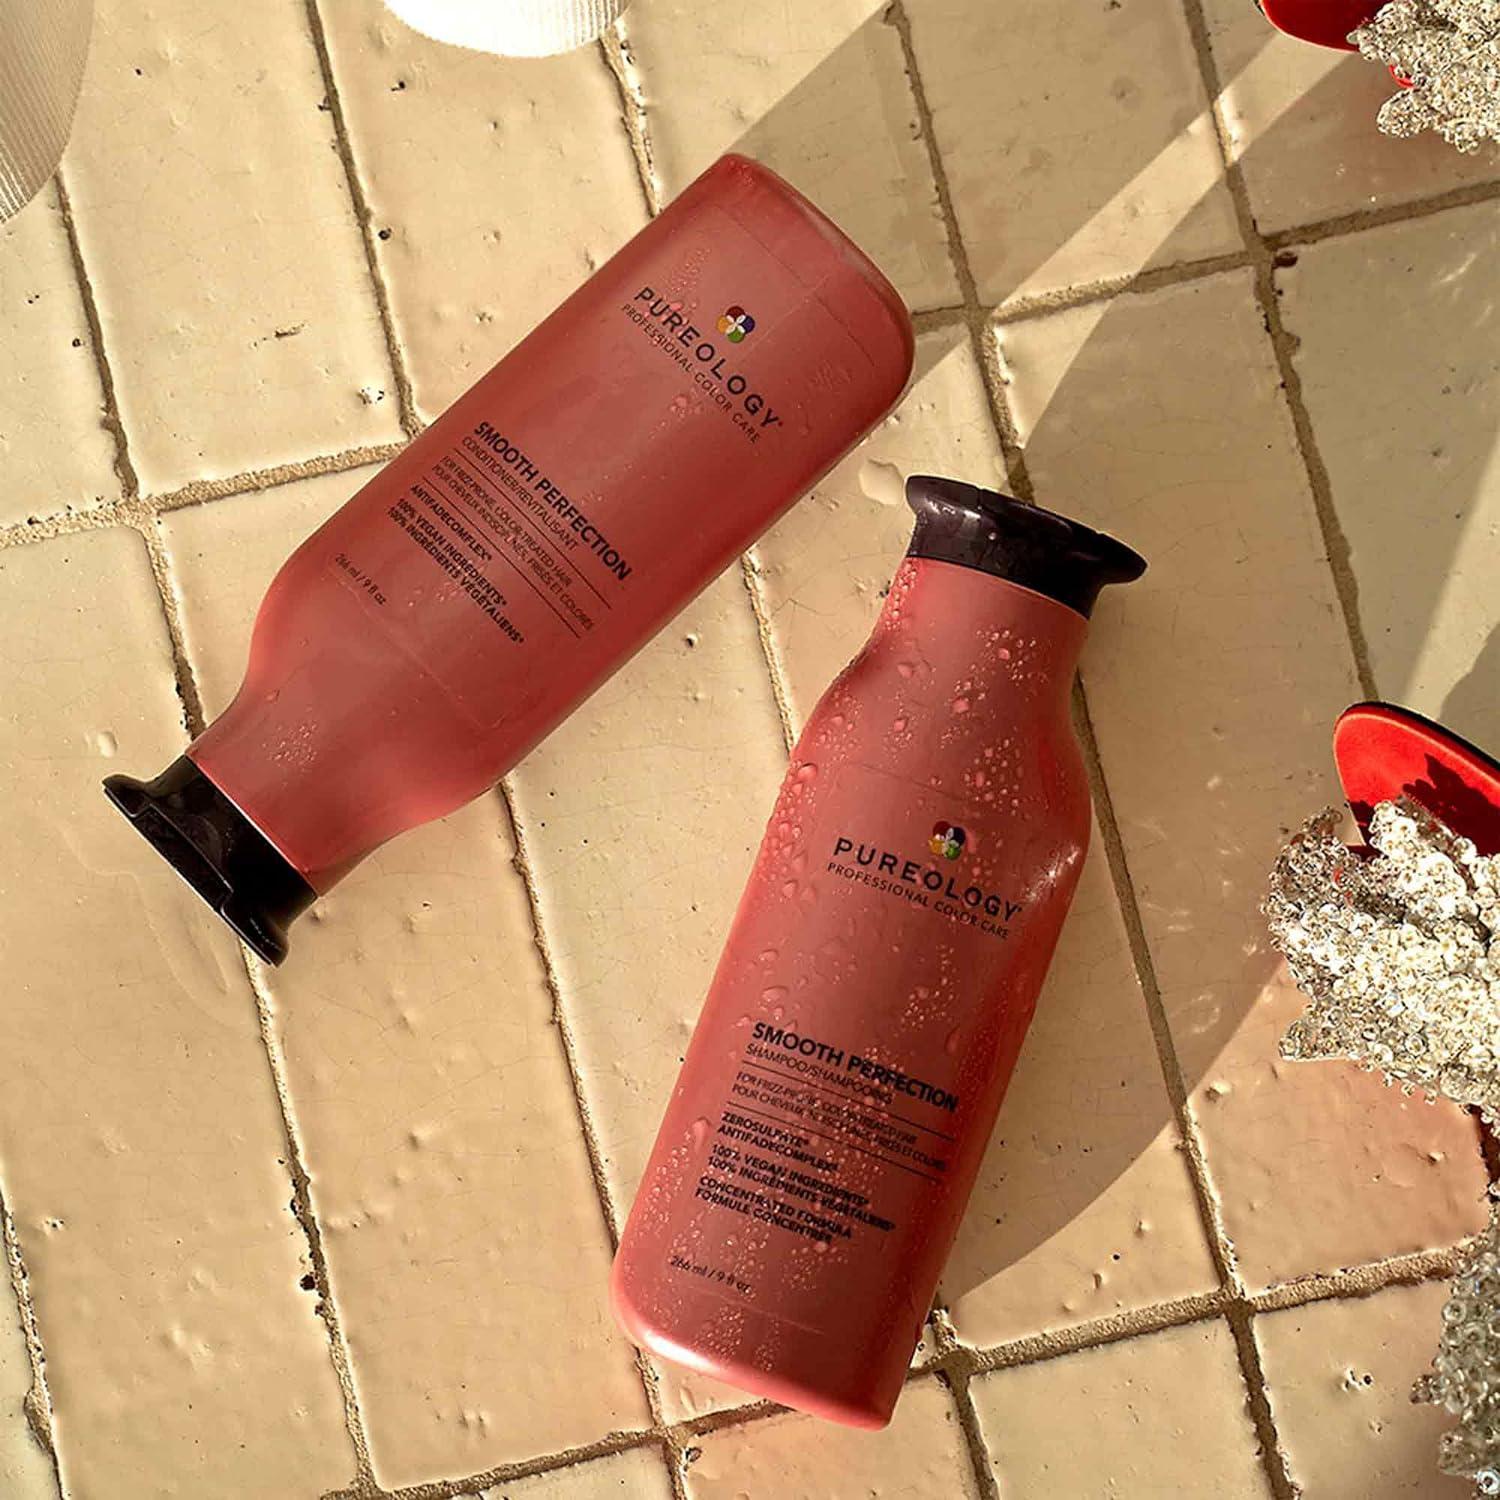 Pureology Smooth Perfection Anti Frizz Shampoo and Conditioner Set, Smooths Hair & Color Safe, Sulfate-Free, Vegan